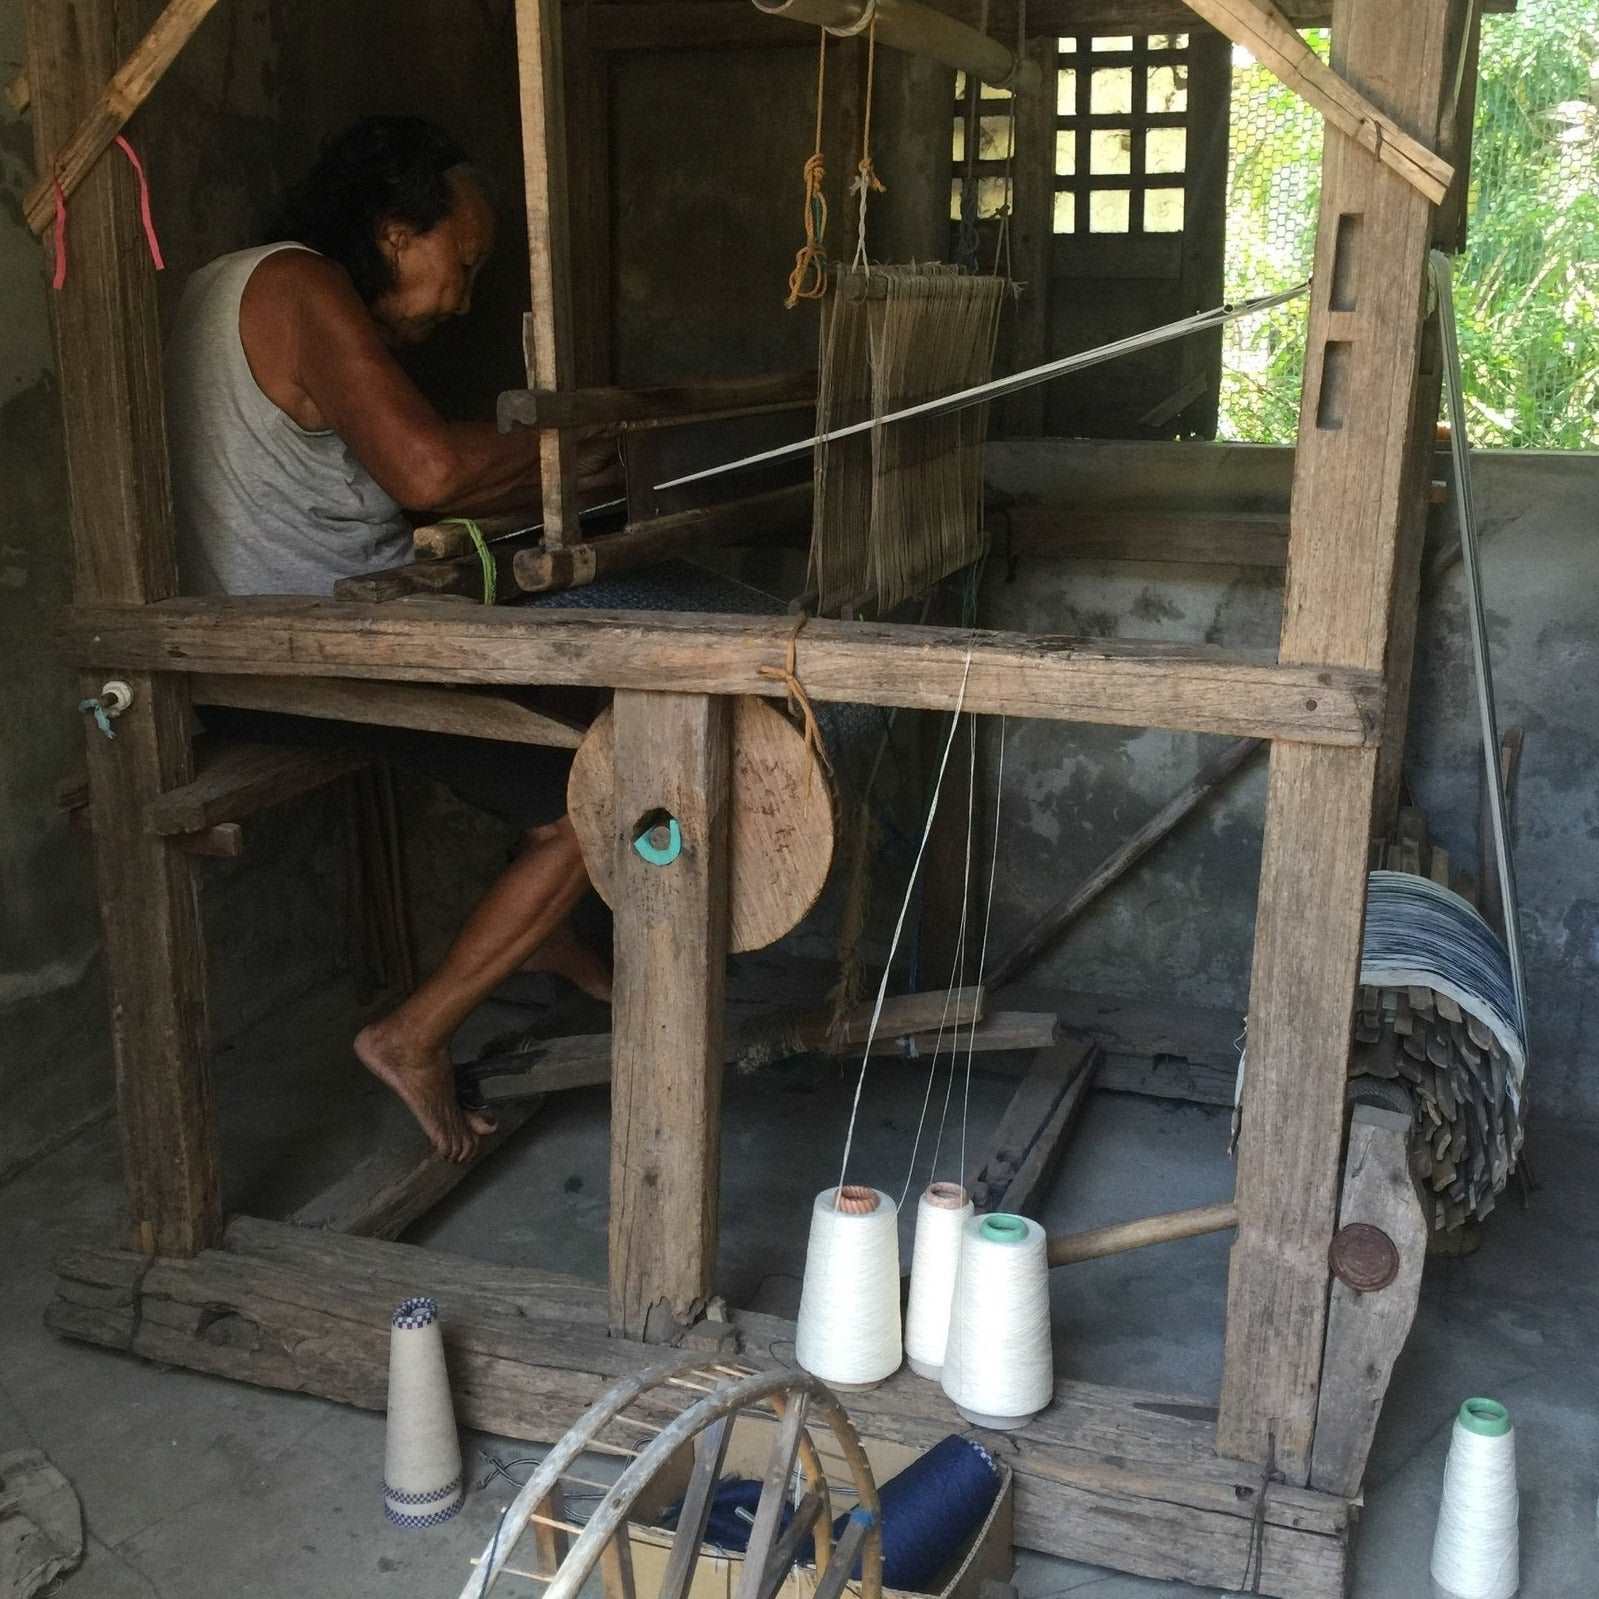 Weaver in the Philippines